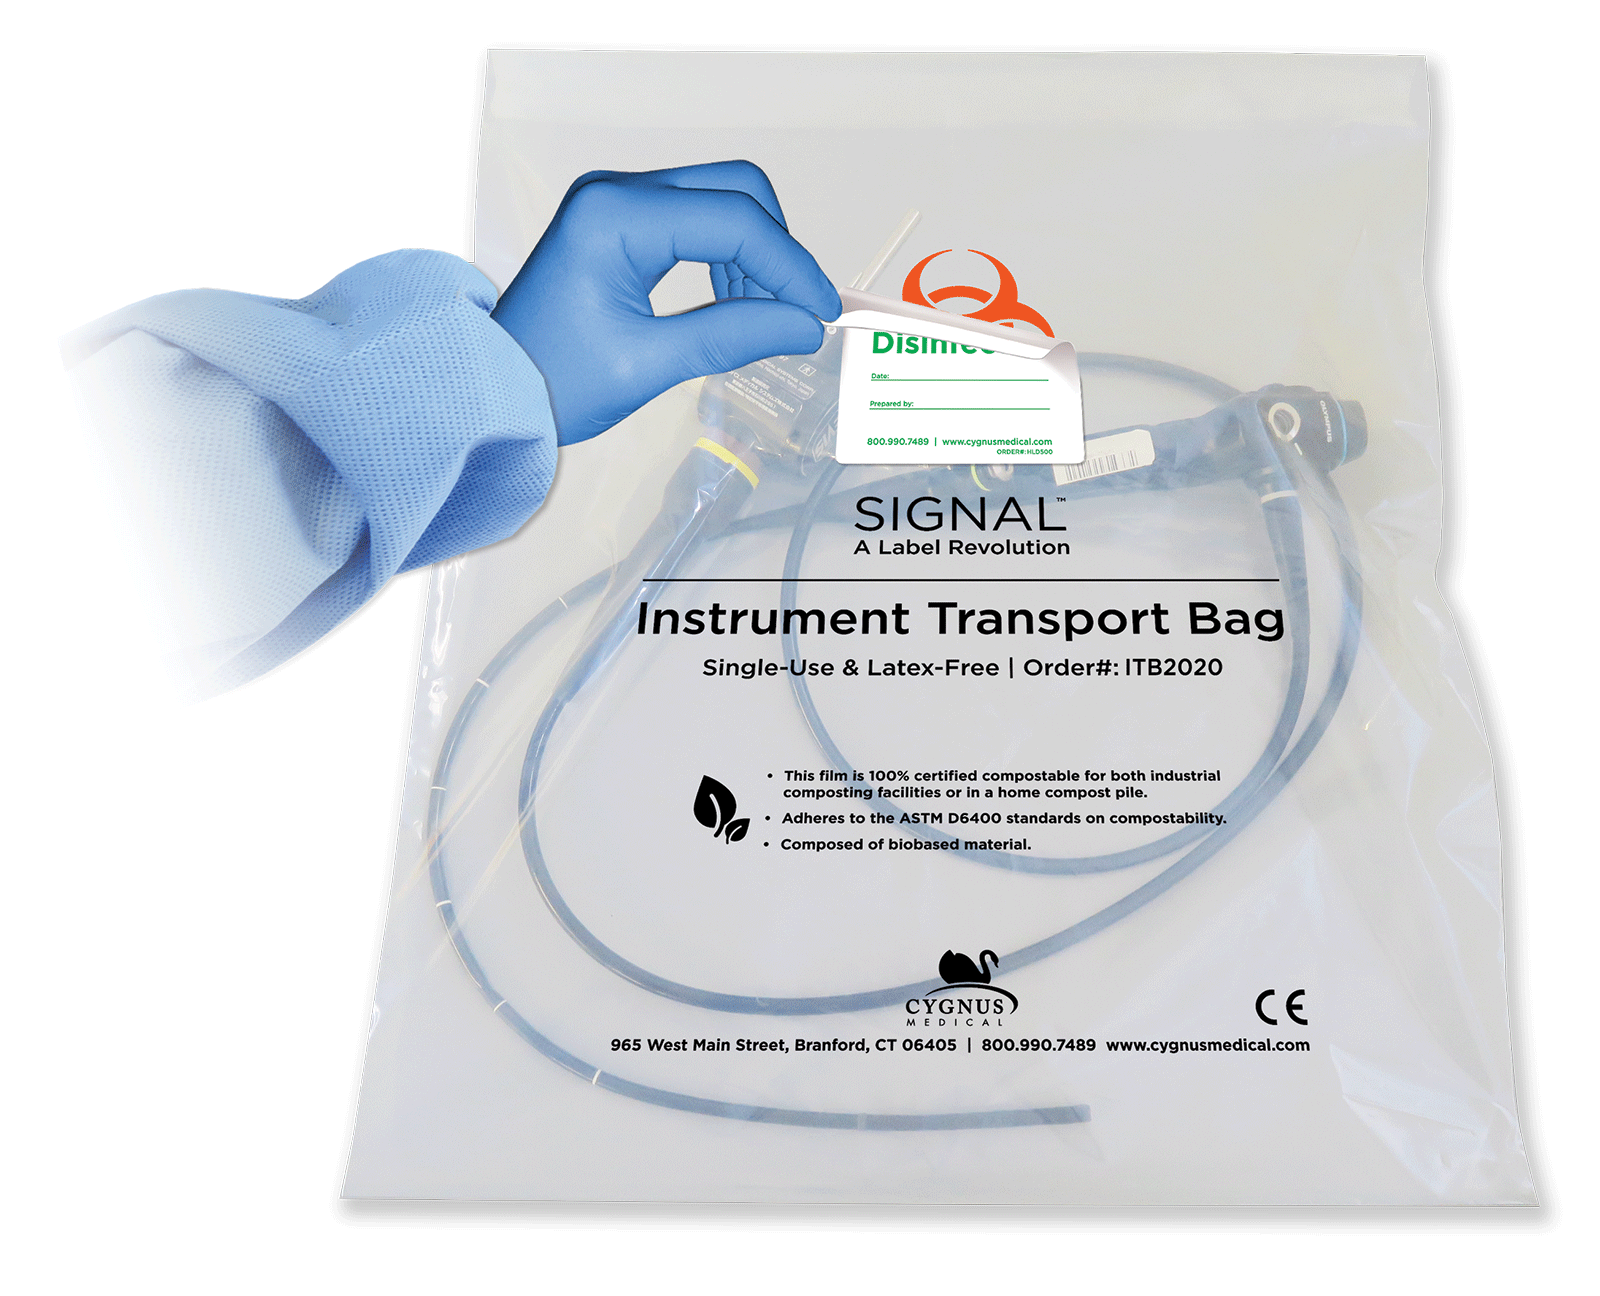 Signal-endoscope-surgical-instrument-transport-bag-with-hld-label